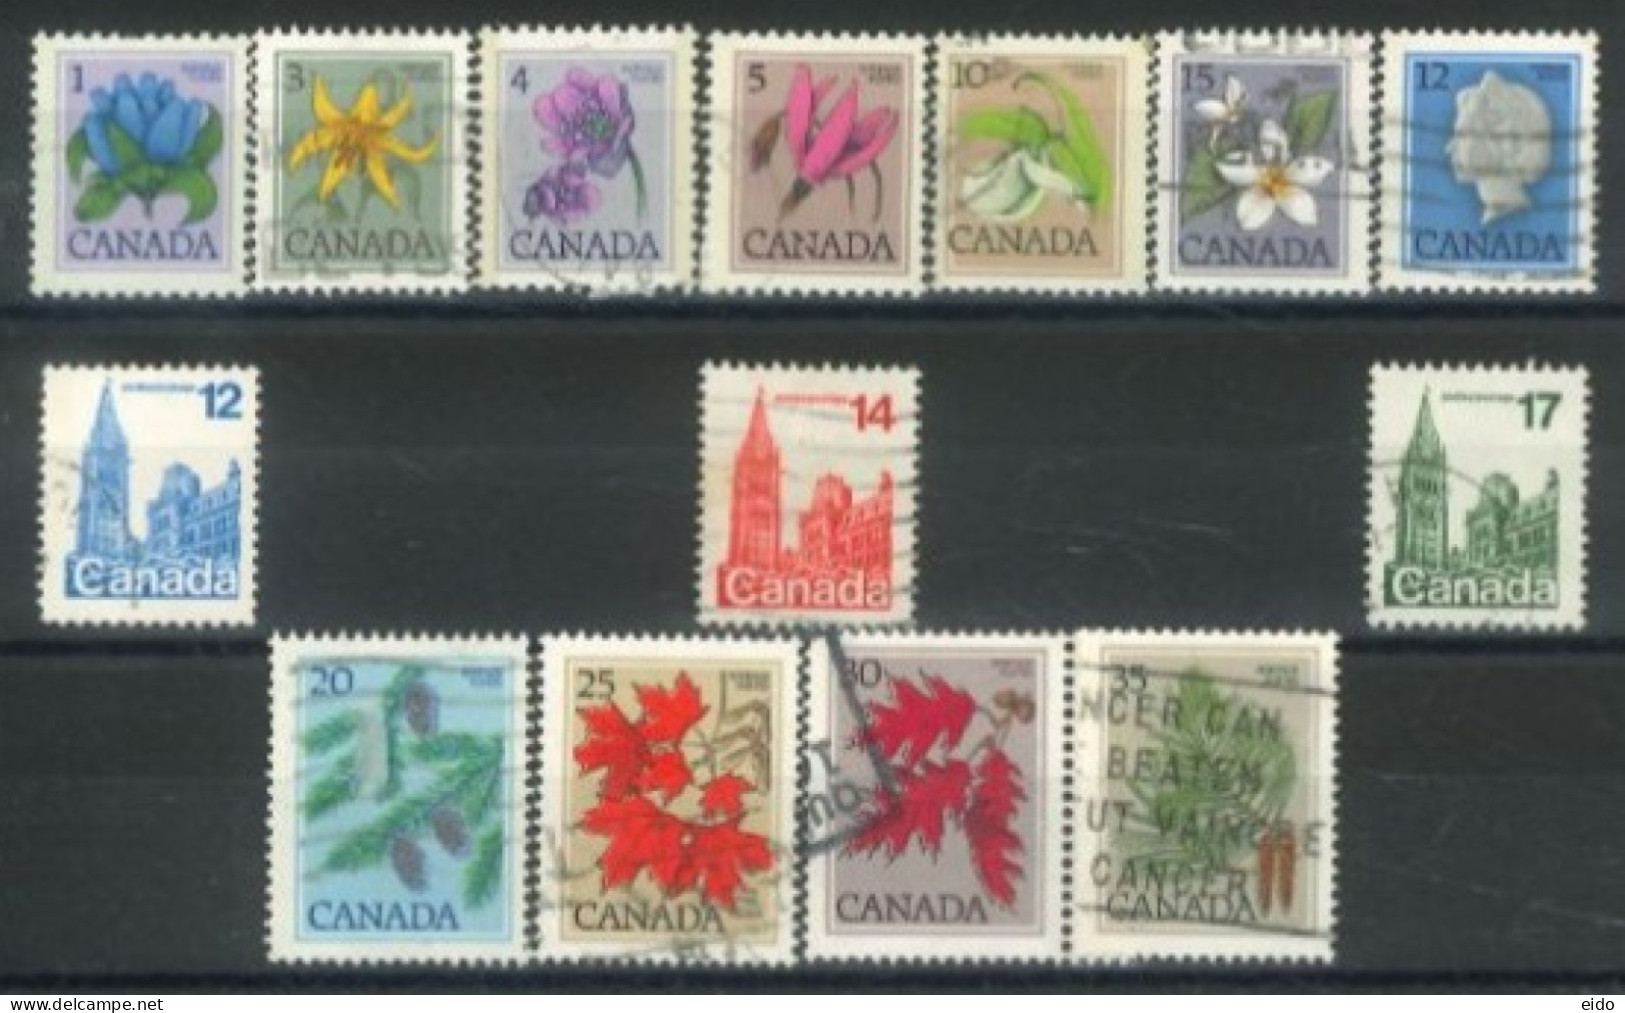 CANADA - 1977, QUEEN ELIZABETH II, HOUSE OF PARLIAMENT, FLOWERS & LEAVES STAMPS SET OF 14, USED. - Gebraucht